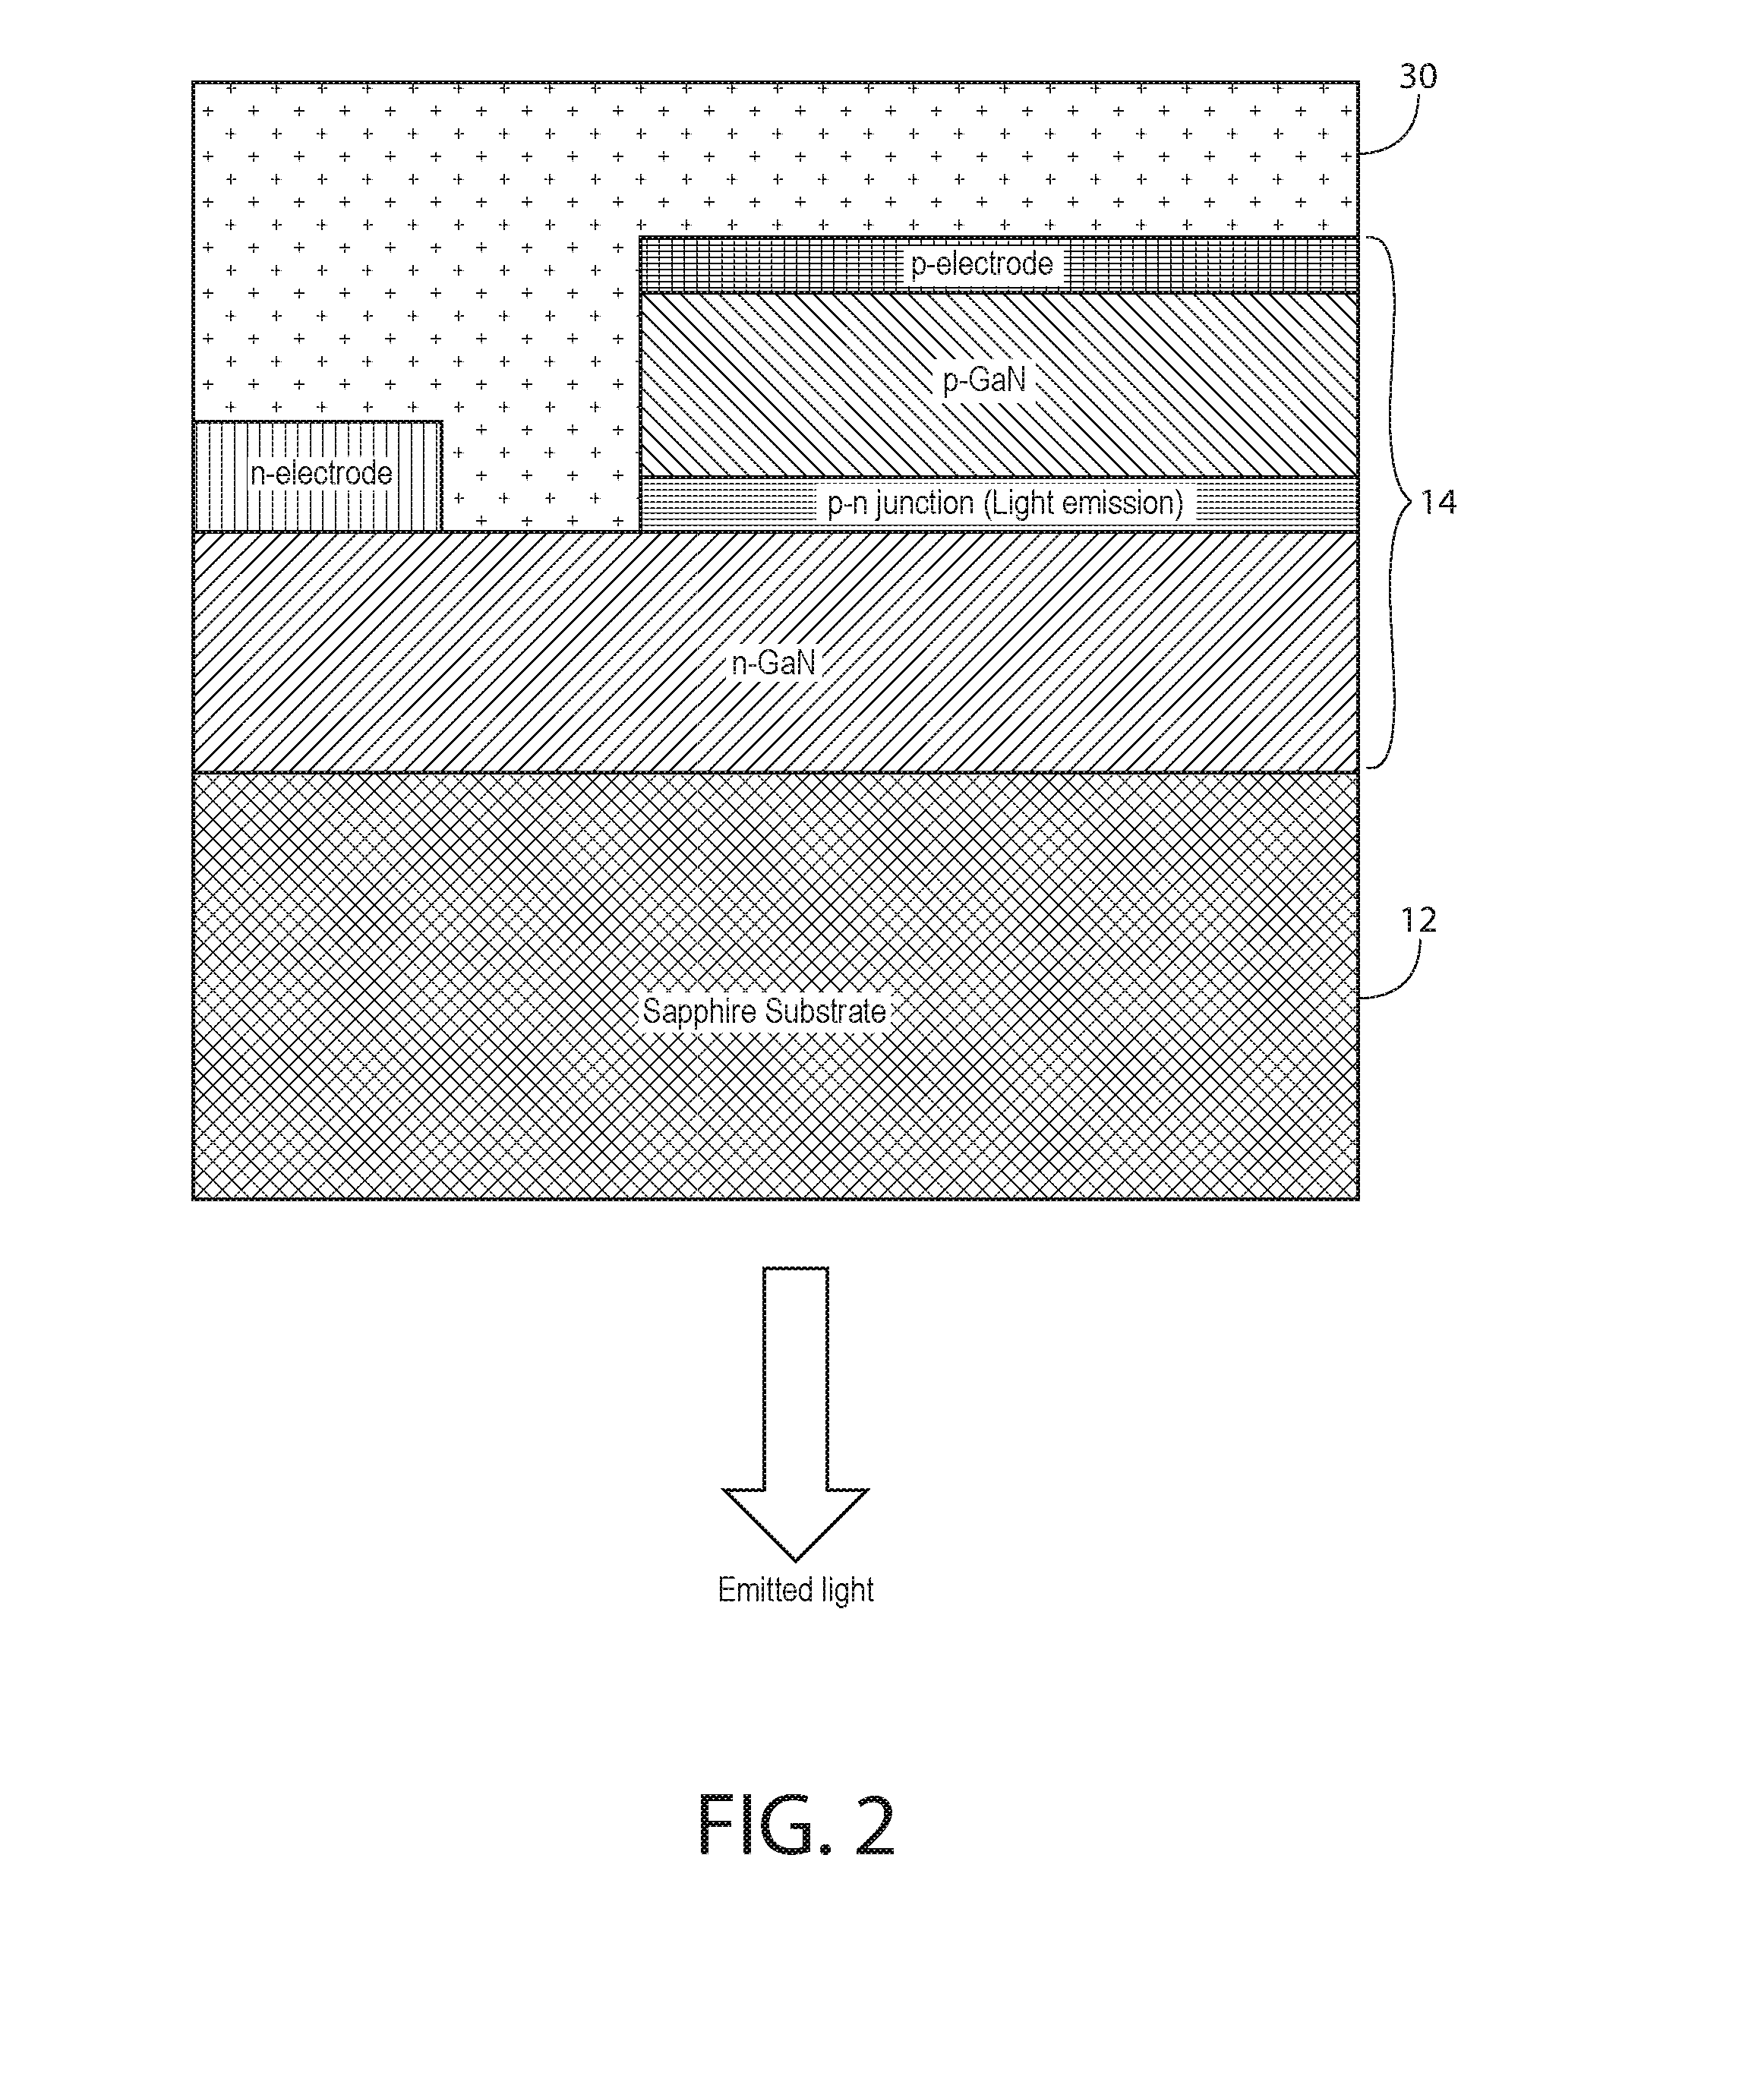 Method of integrating inorganic light emitting diode with oxide thin film transistor for display applications